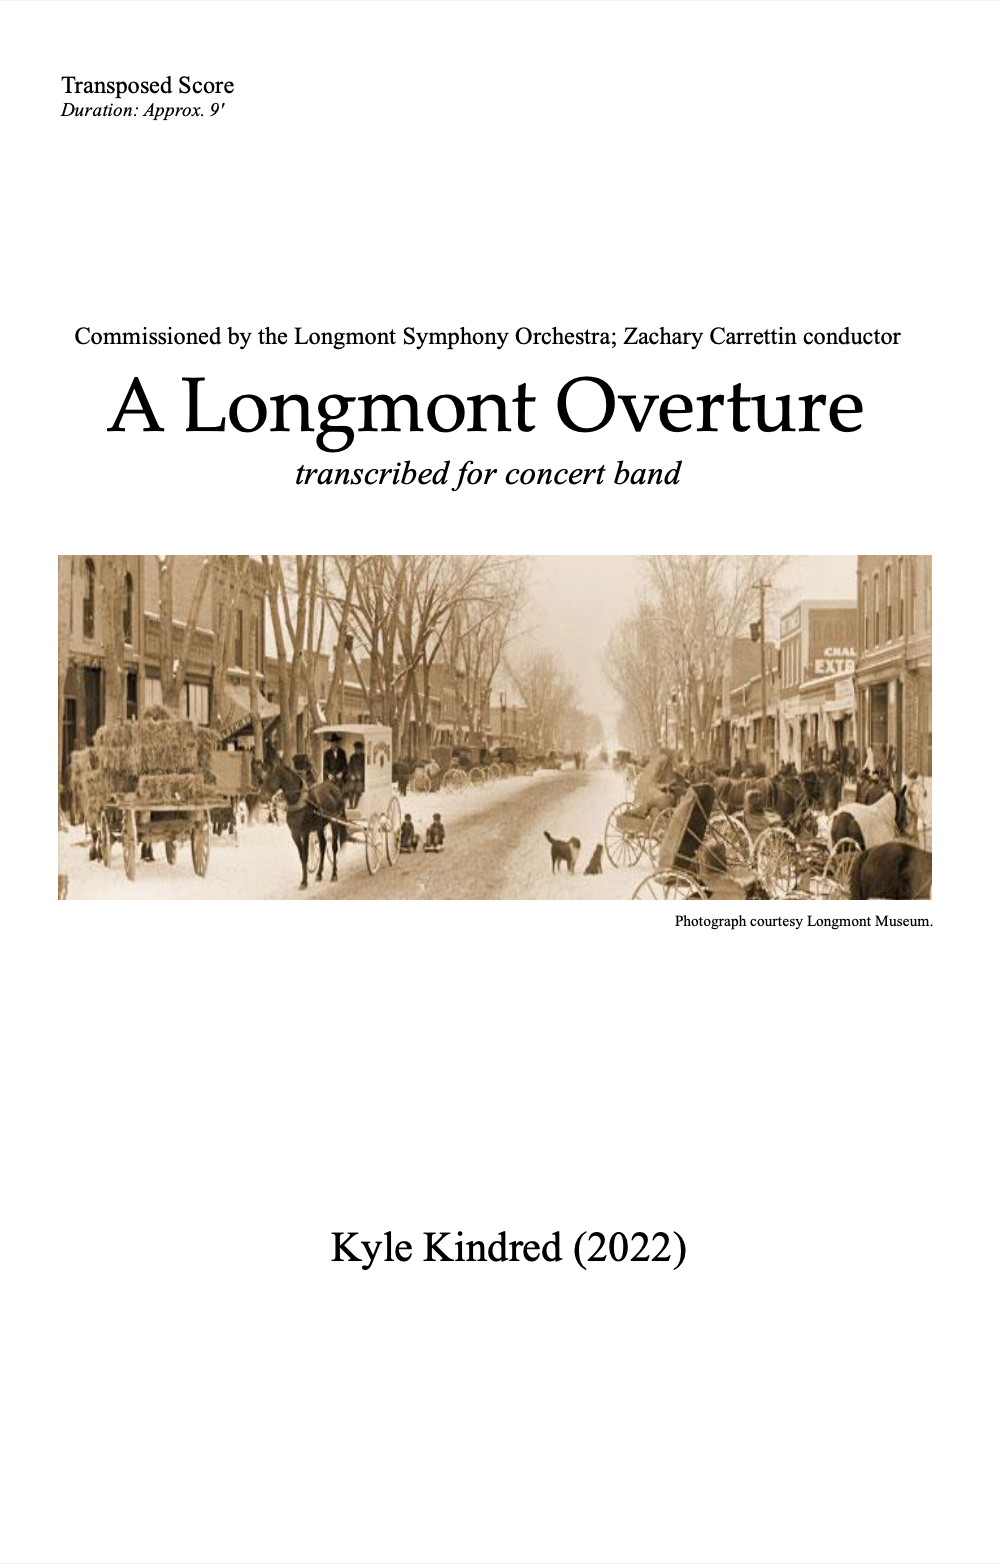 A Longmont Overture by Kyle Kindred